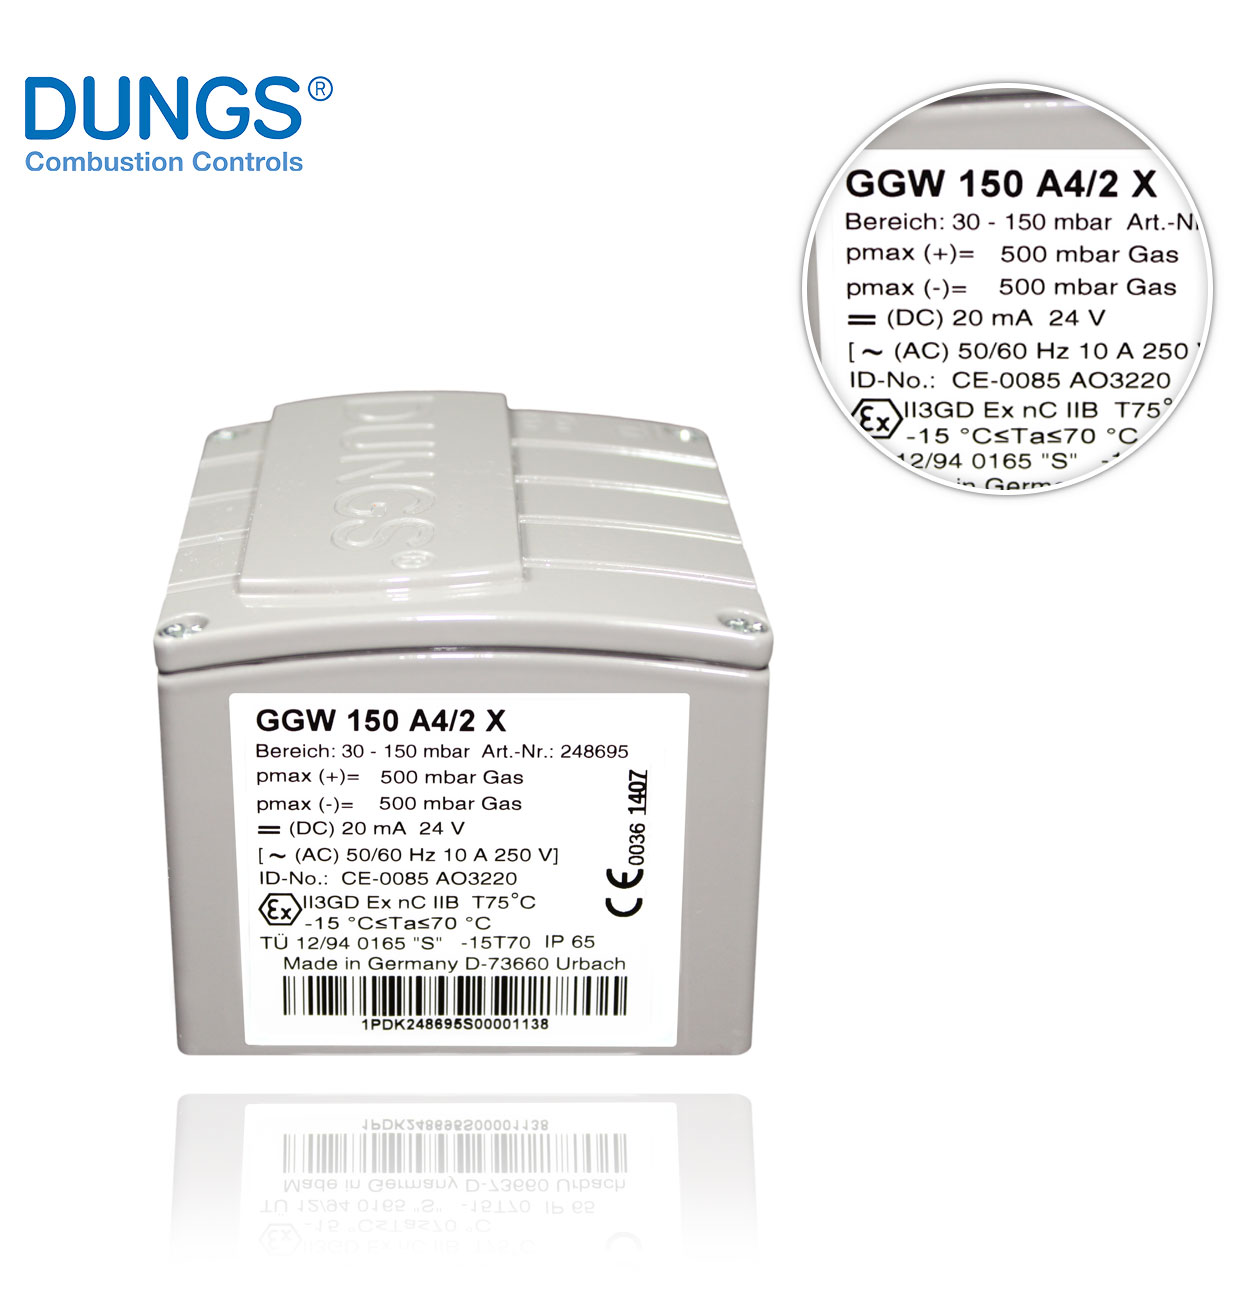 DUNGS 248695 GGW 150 A4/2 X 30-150mbar. ATEX Z2-22 FOR GAS AND/OR AIR